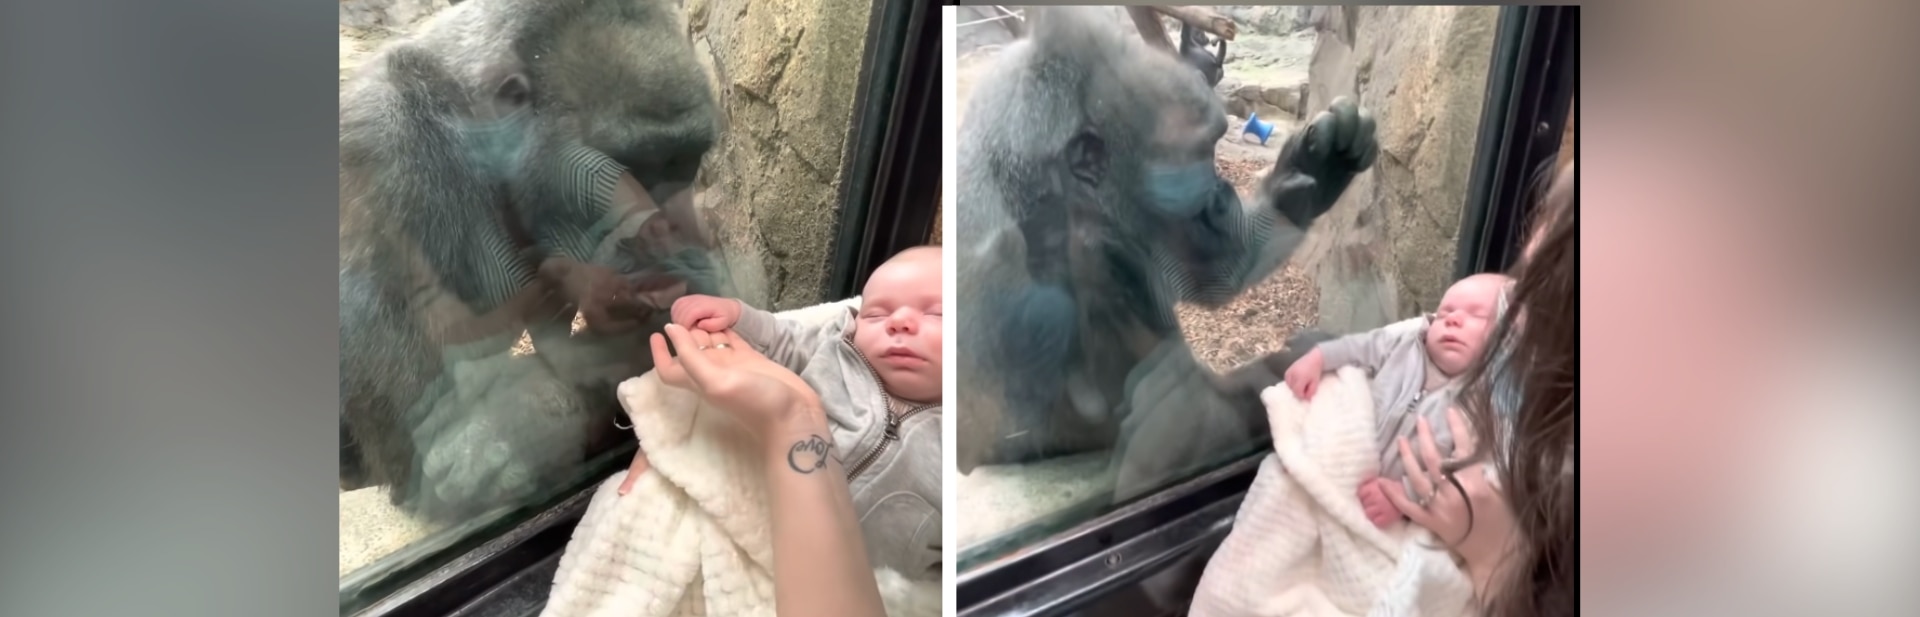 Gorilla Mother Fascinated By Human Baby Creates Unforgettable Zoo Encounter At Boston Zoo